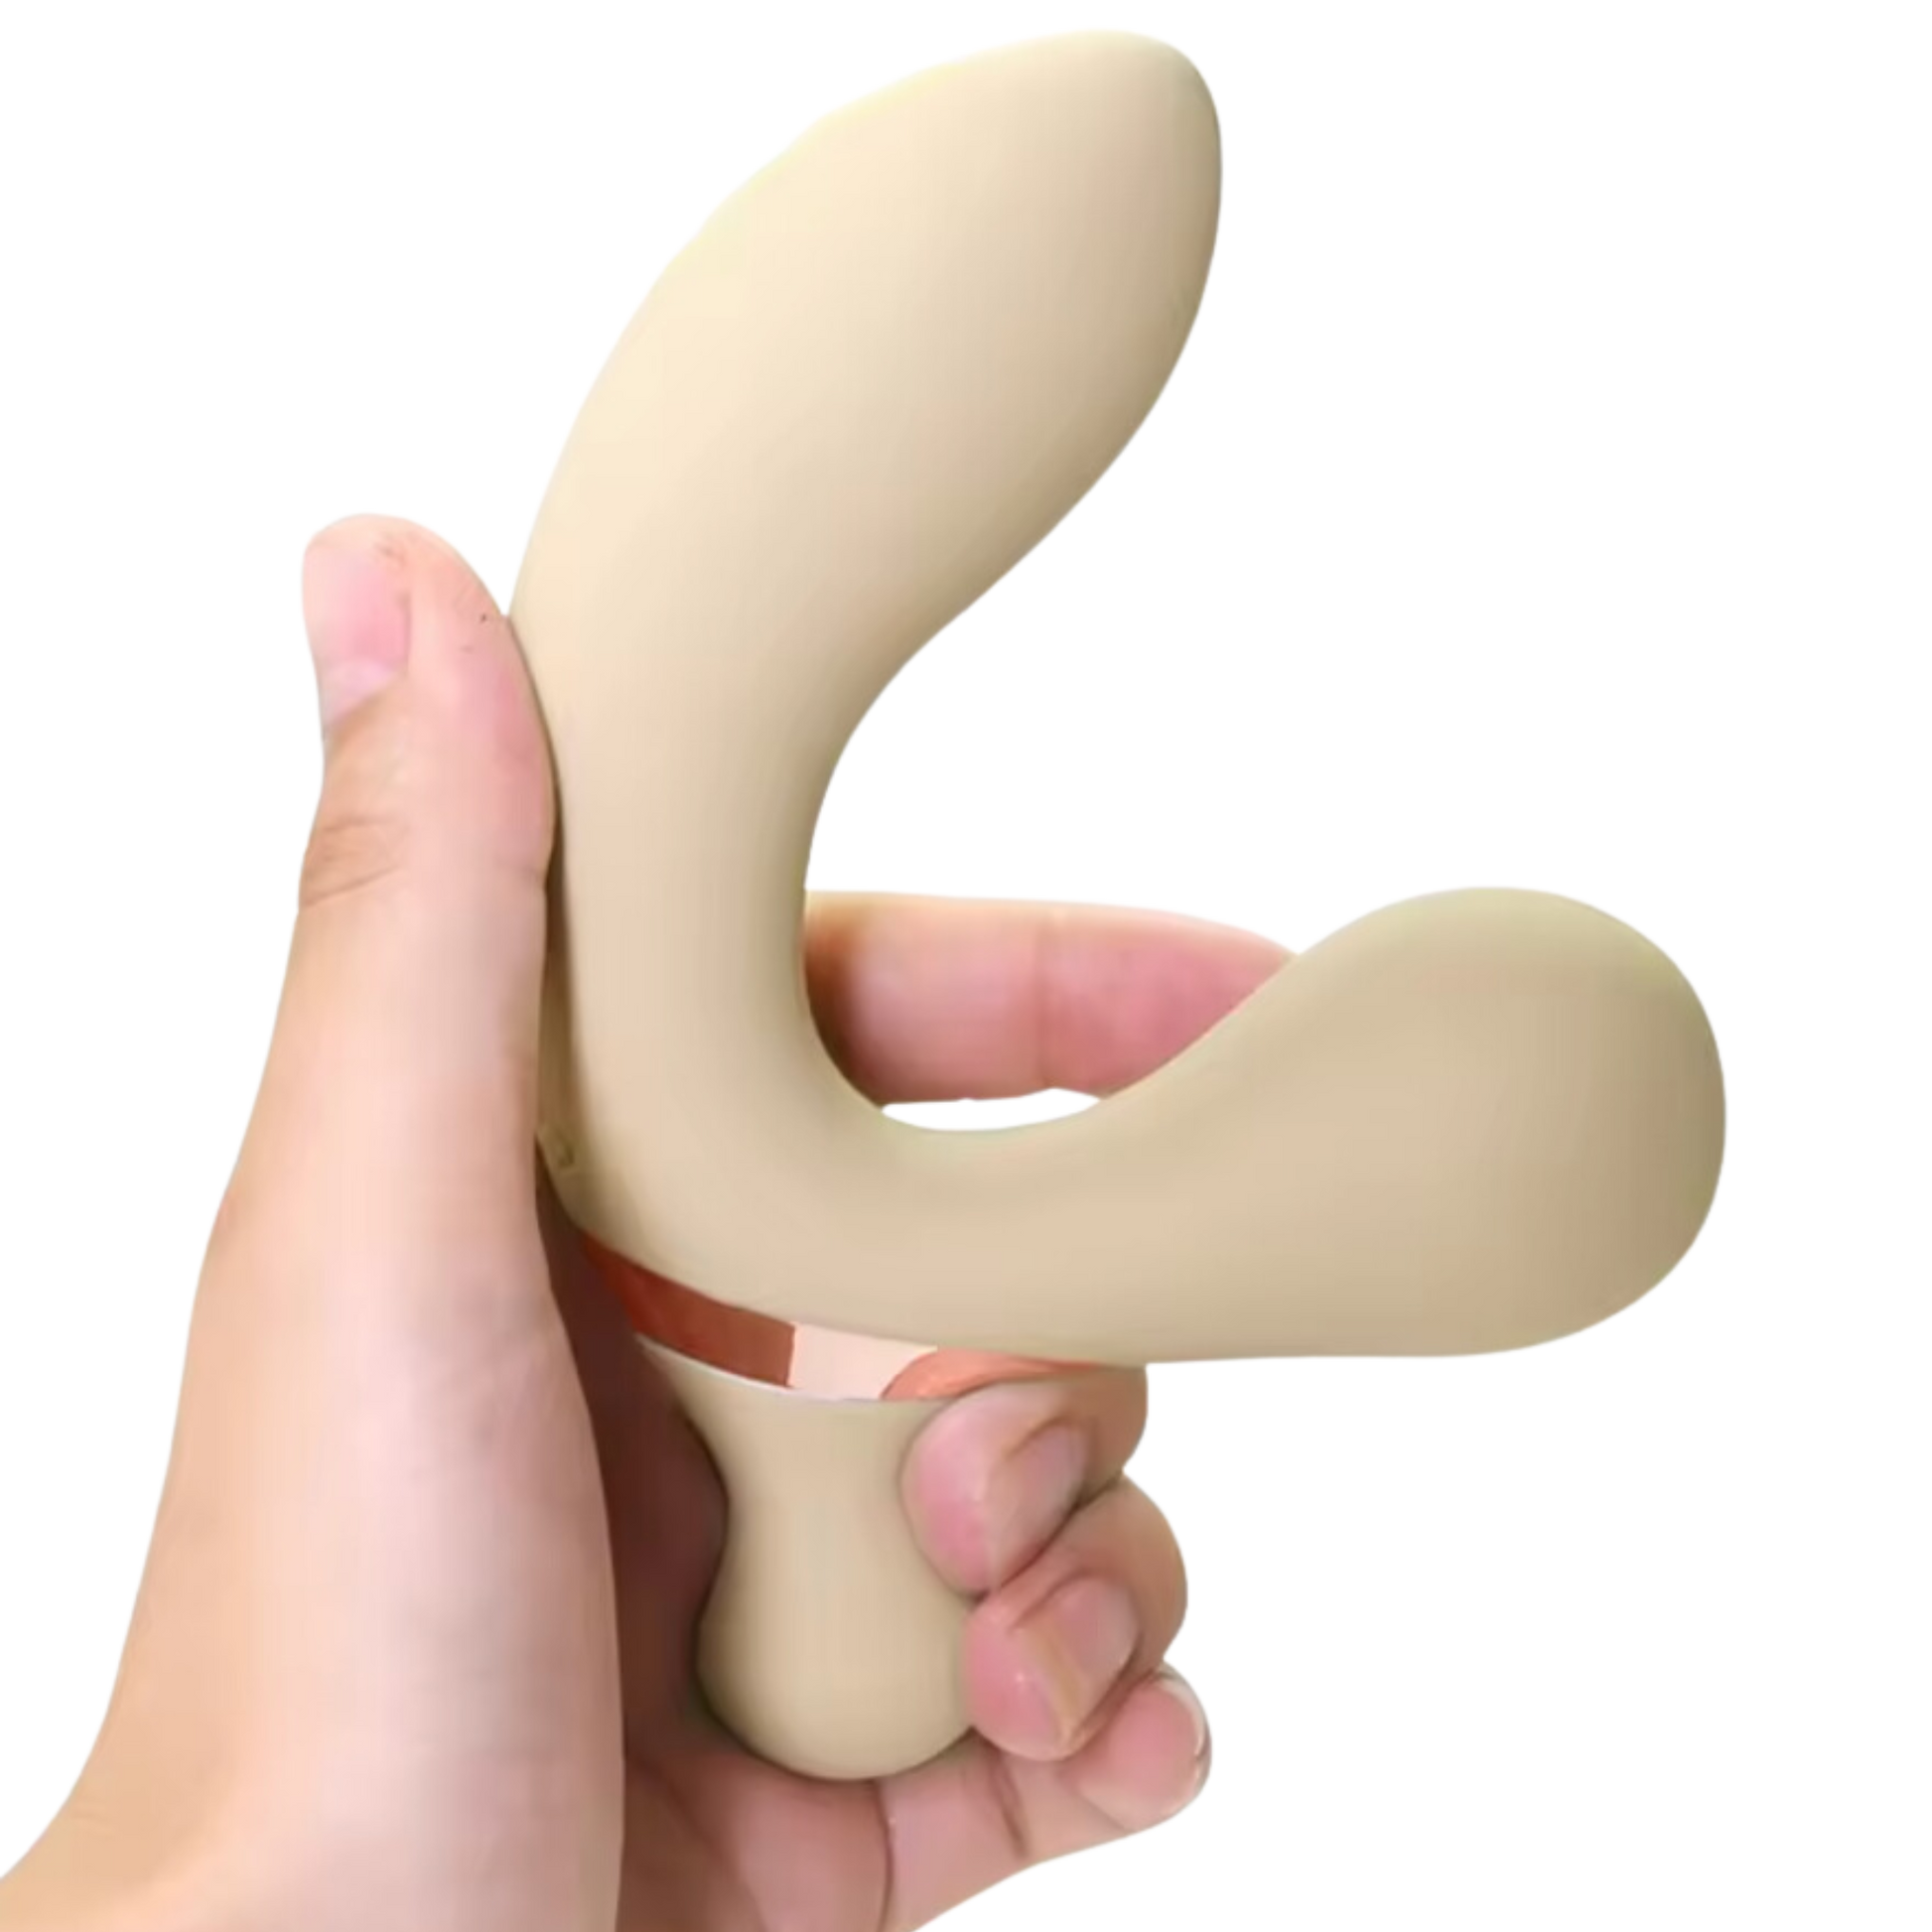 Blissed Out-In | 2 in 1 G spot Clitoral Stimulator Masturbator Vibrator Sex Toys For Women for $49 – Most Premium Toys from Ecsta Care